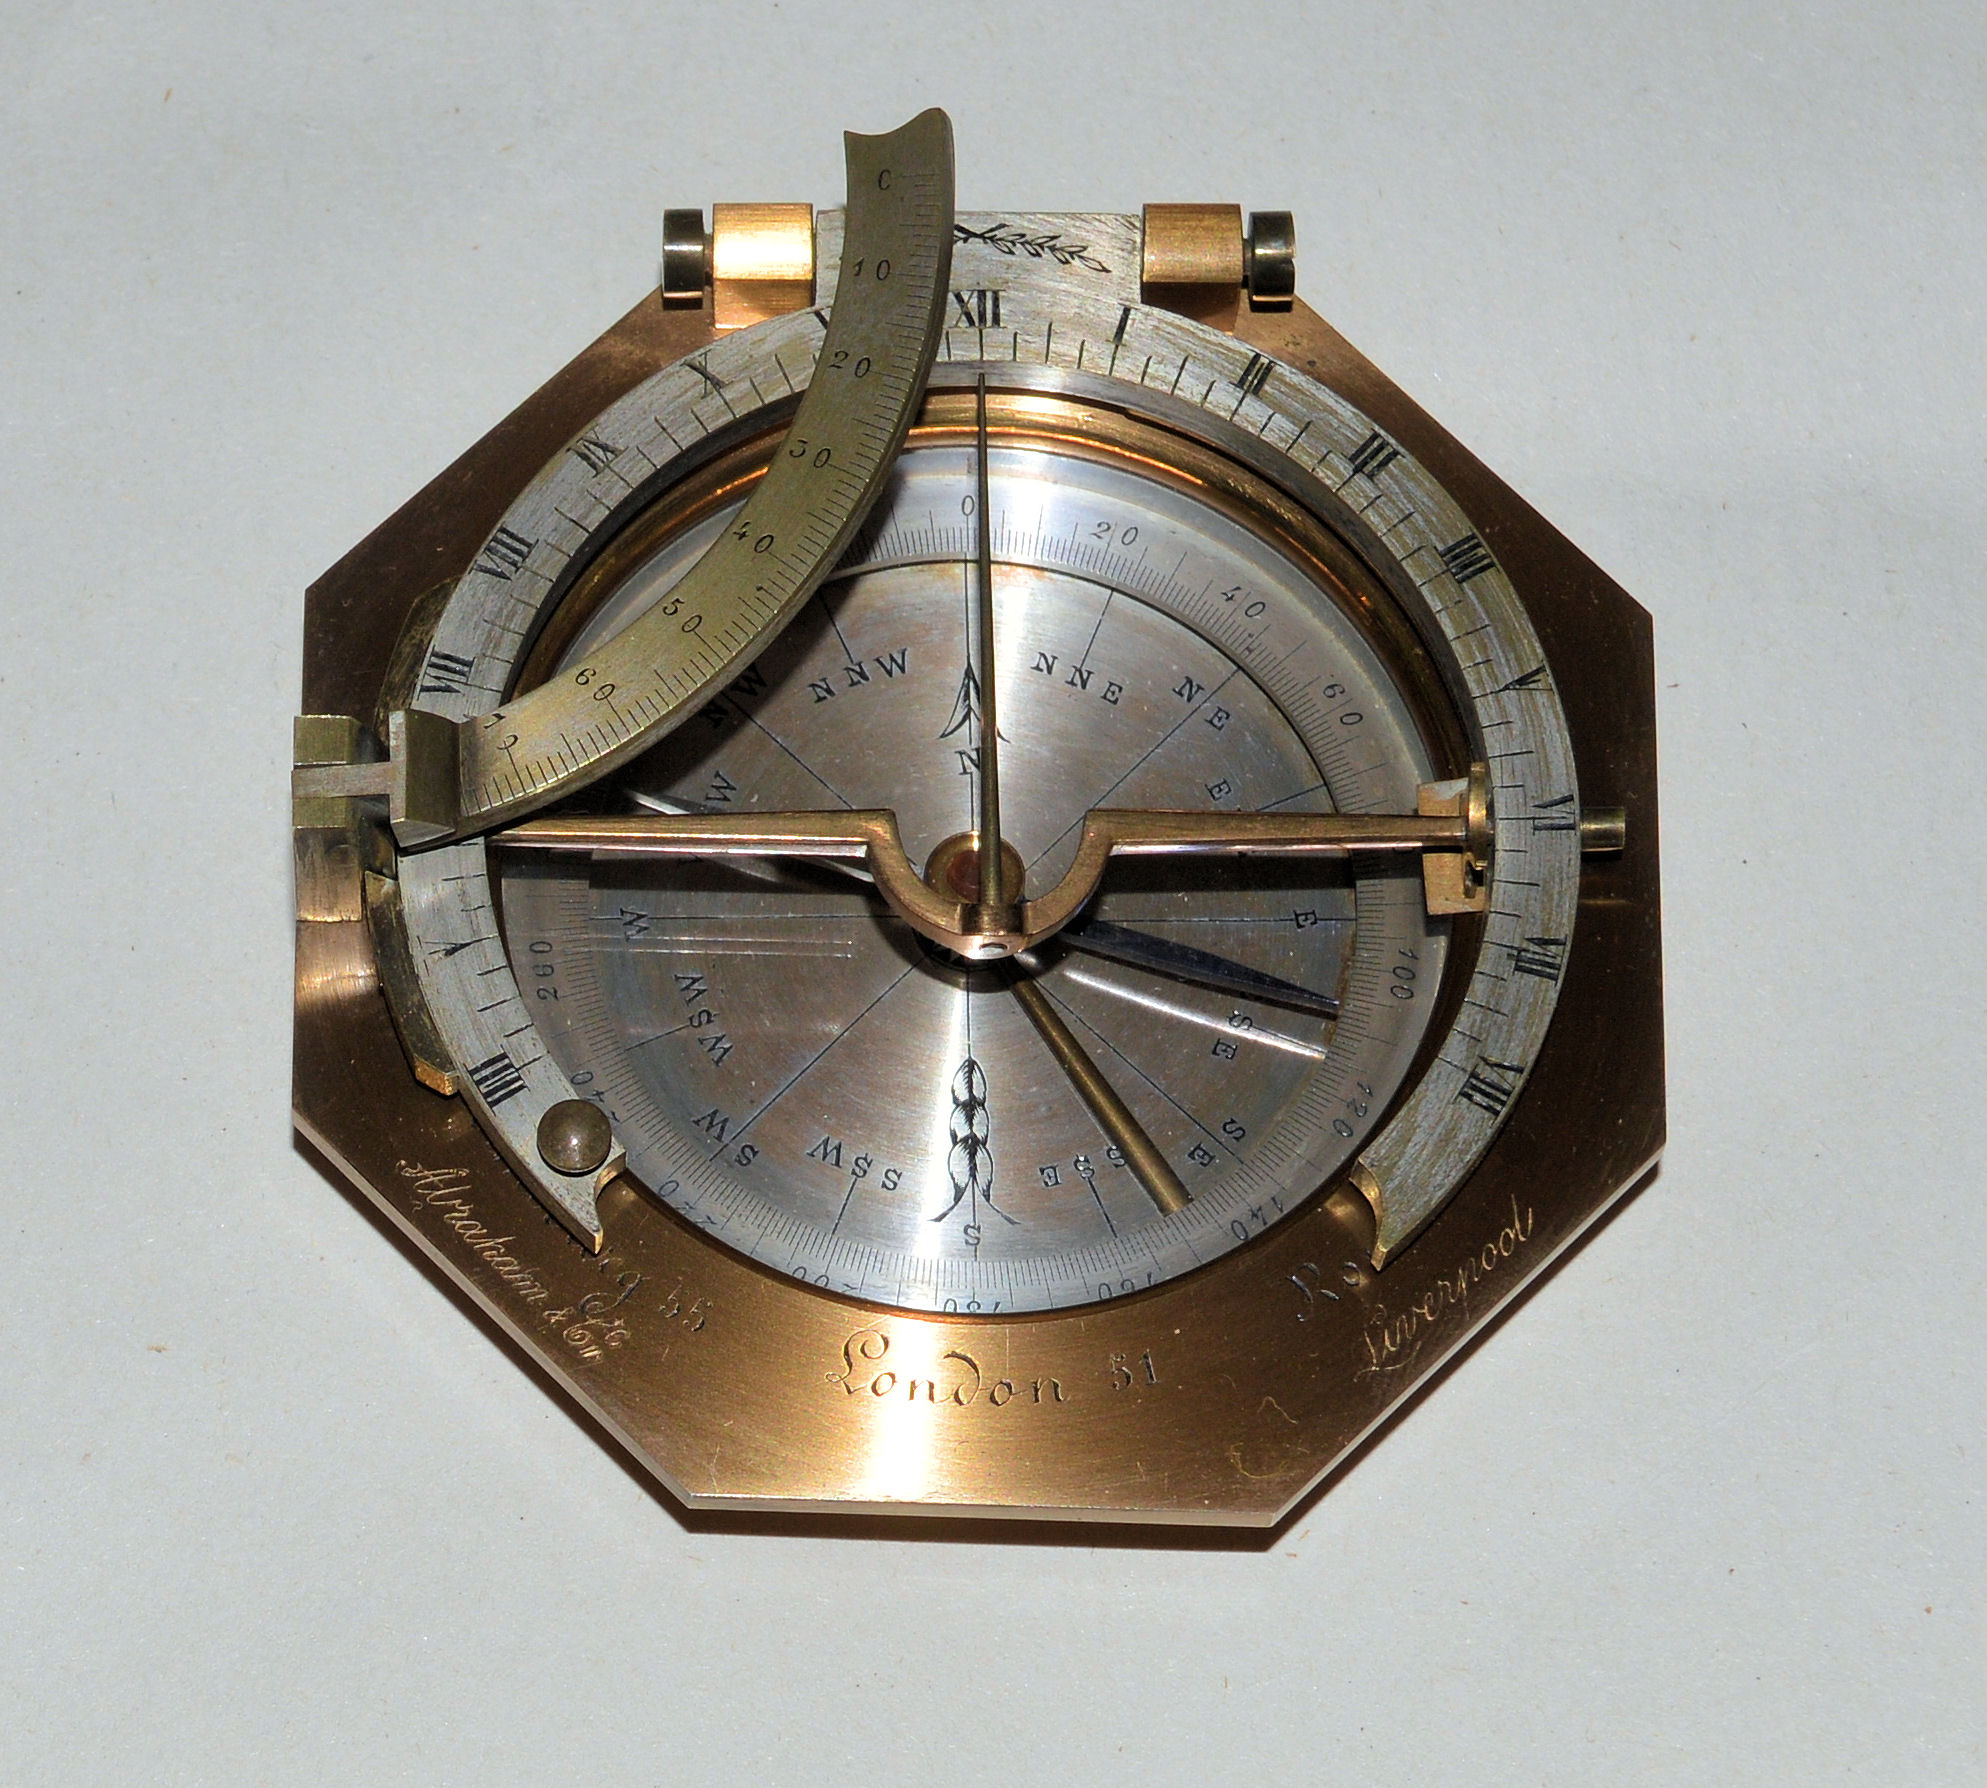 equinoctial universal inclining sundial in case – Abraham & Co., London ...